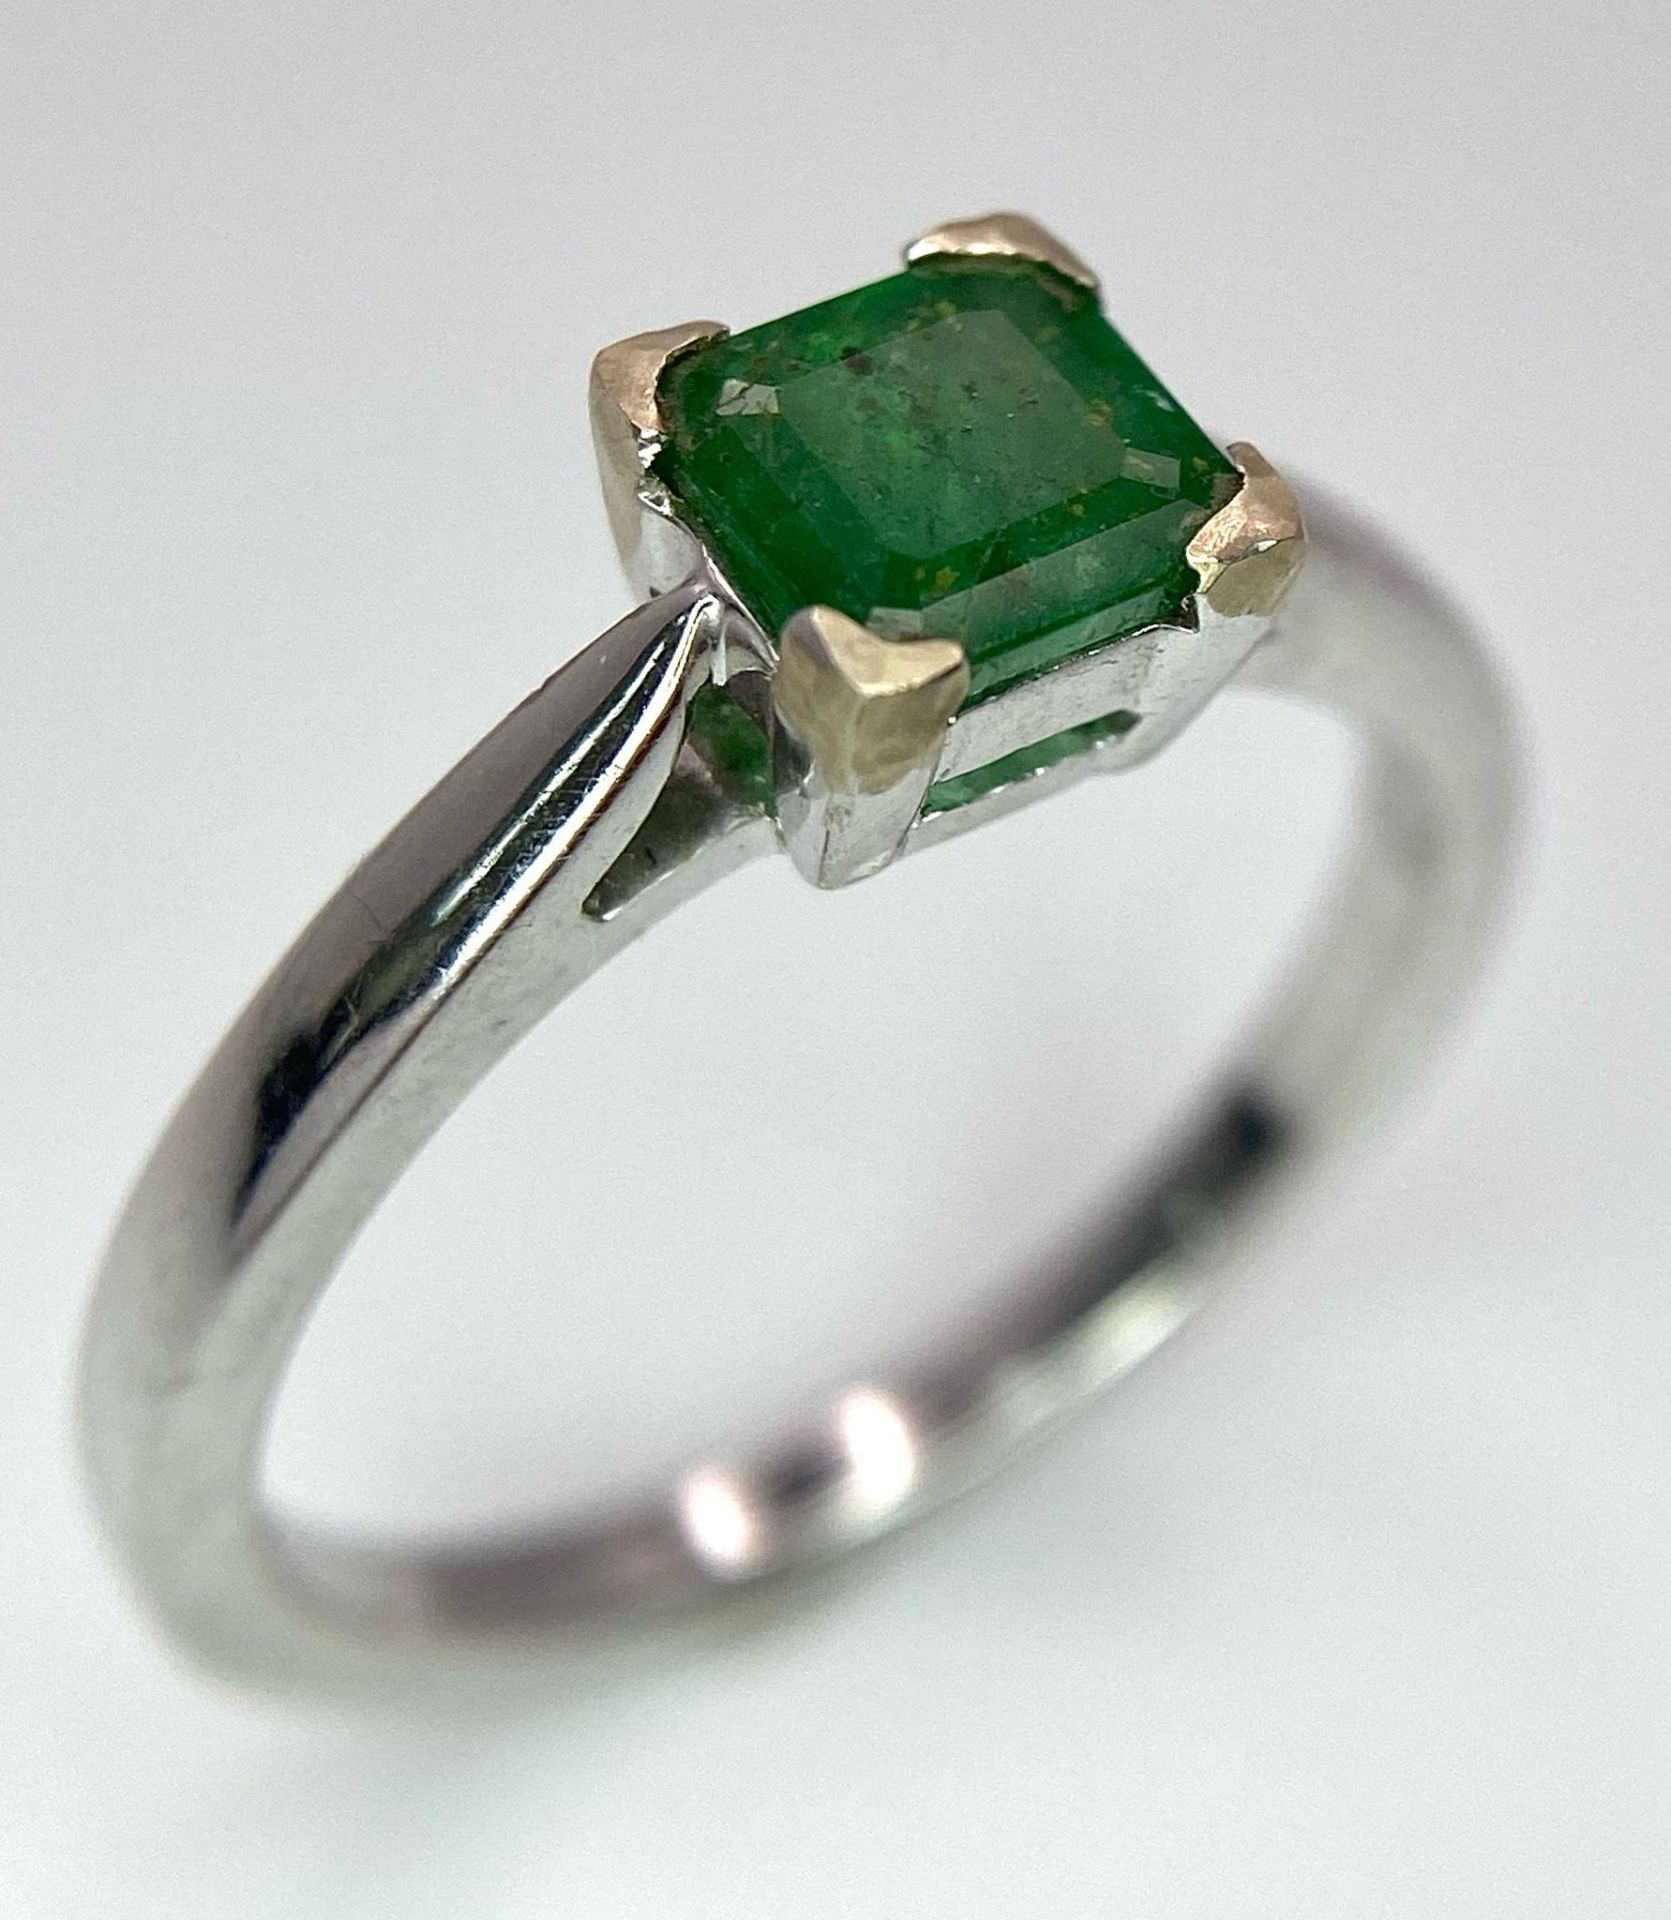 AN 18K WHITE GOLD RING WITH SQUARE EMERALD CENTRE STONE . 3.3gms size N